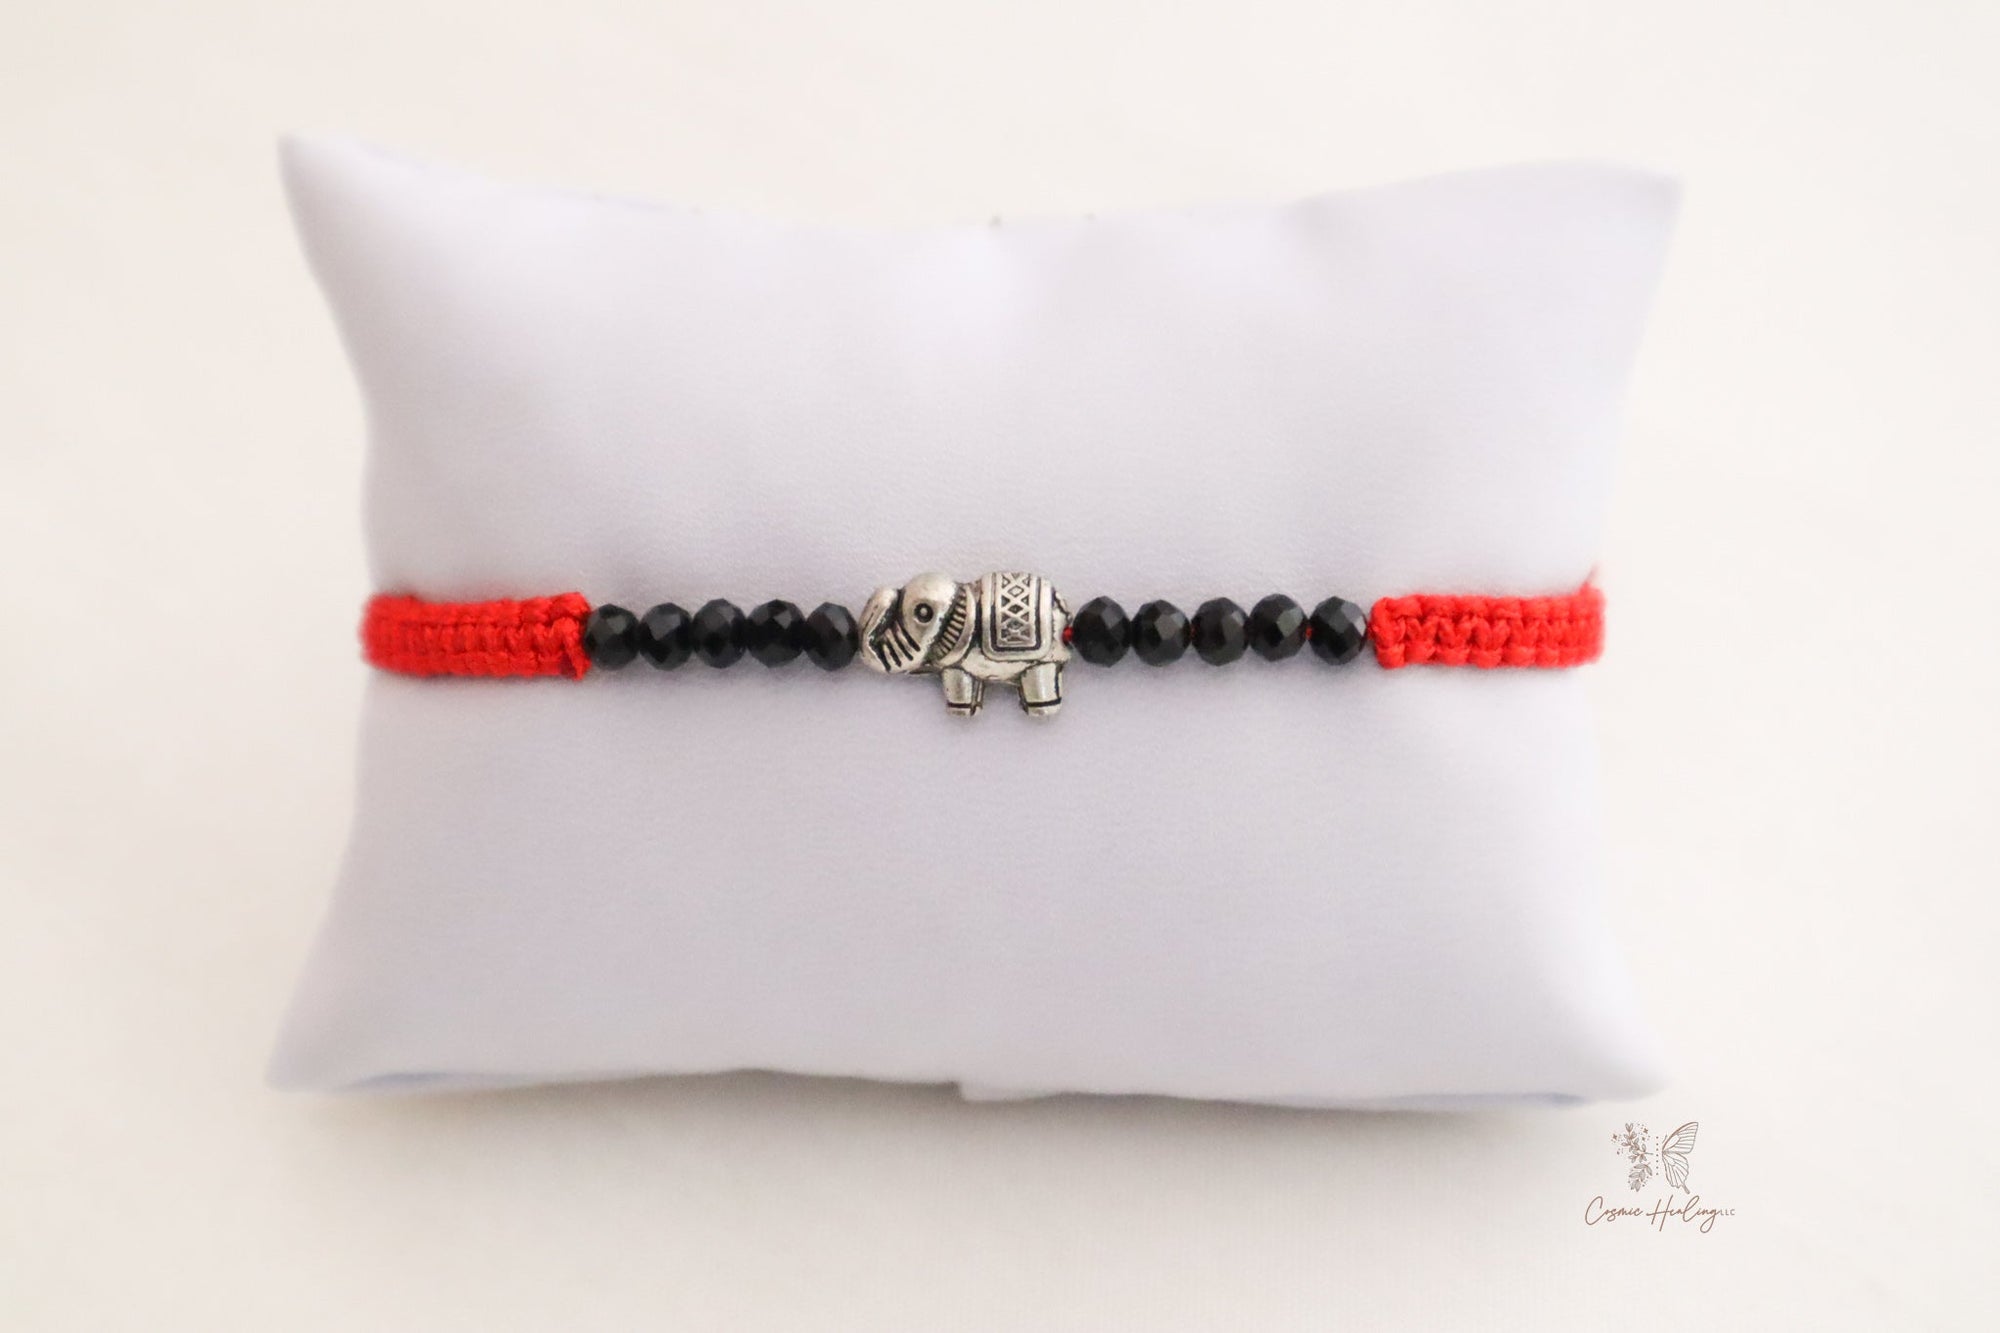 Red Cord Lucky Elephant Bracelet Adjustable Knot Black Silver Beads - Shop Cosmic Healing